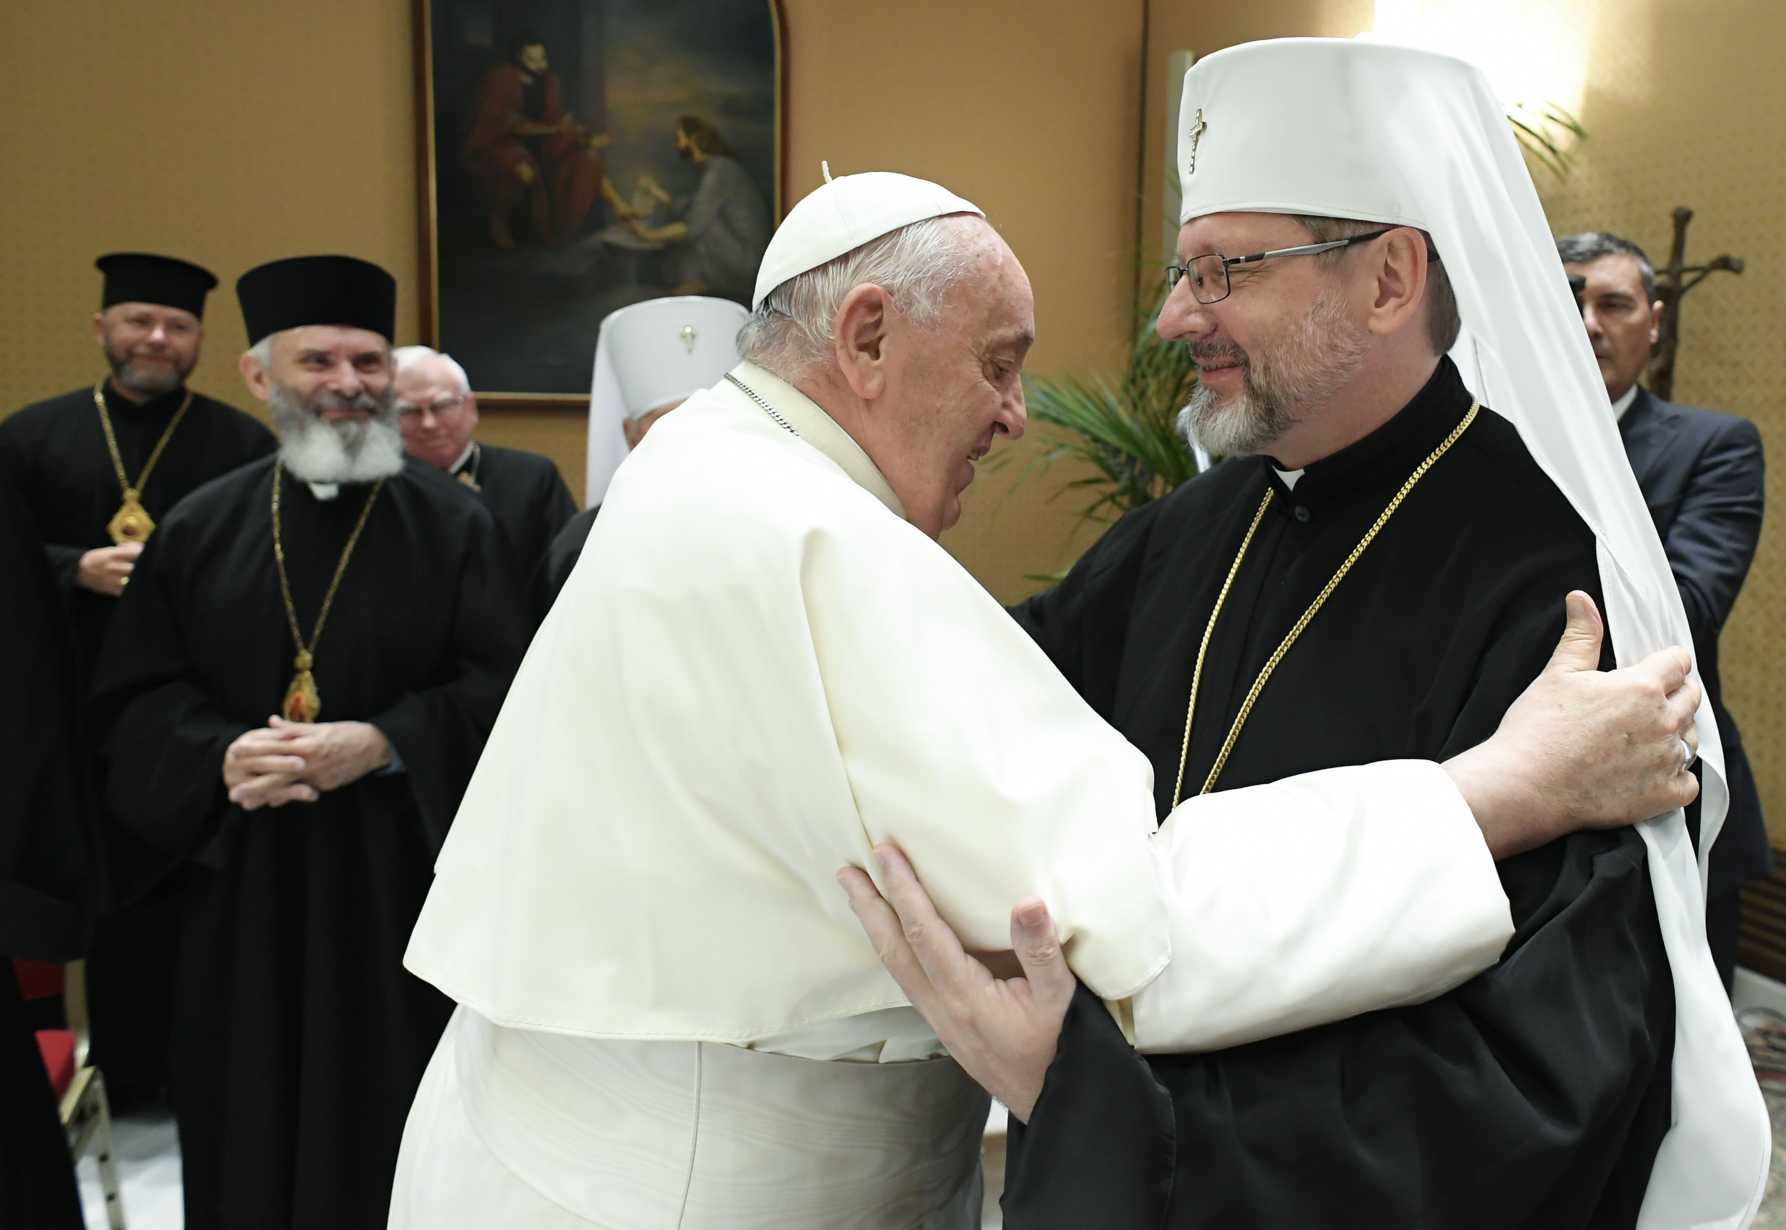 Ukrainian bishops warn pope that his Russia comments feed propaganda